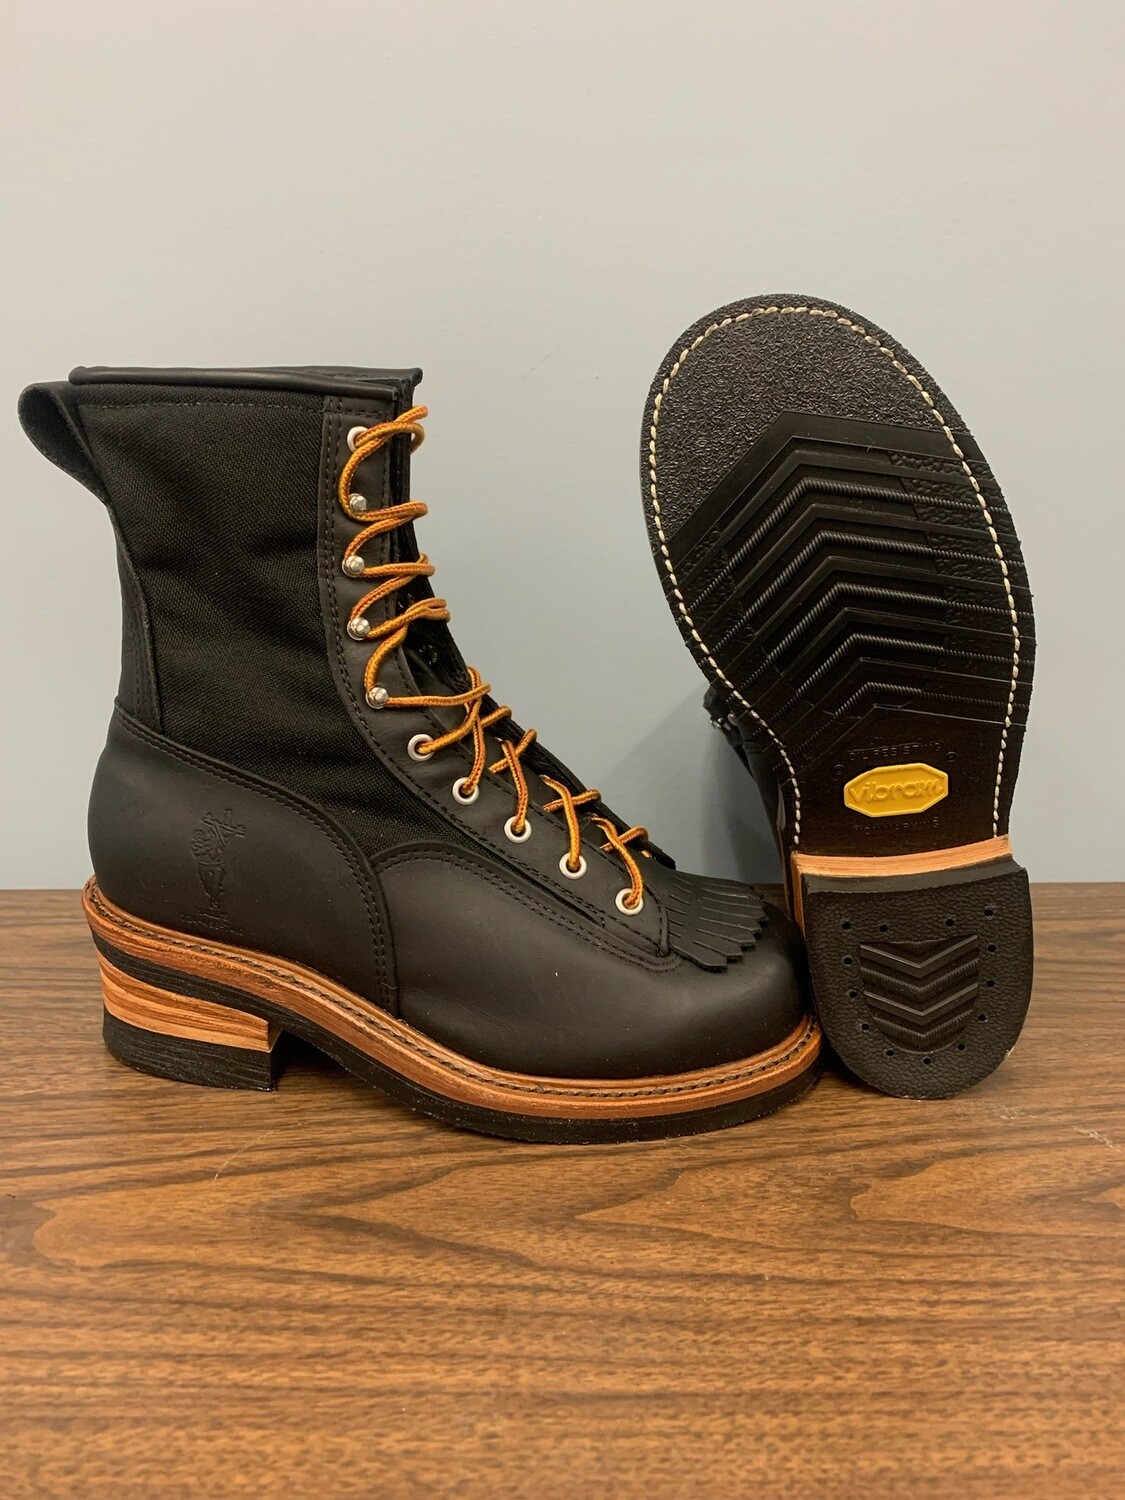 Hall's 945-1 8" Black Lace To Toe Lineman Boots, Made in the USA!